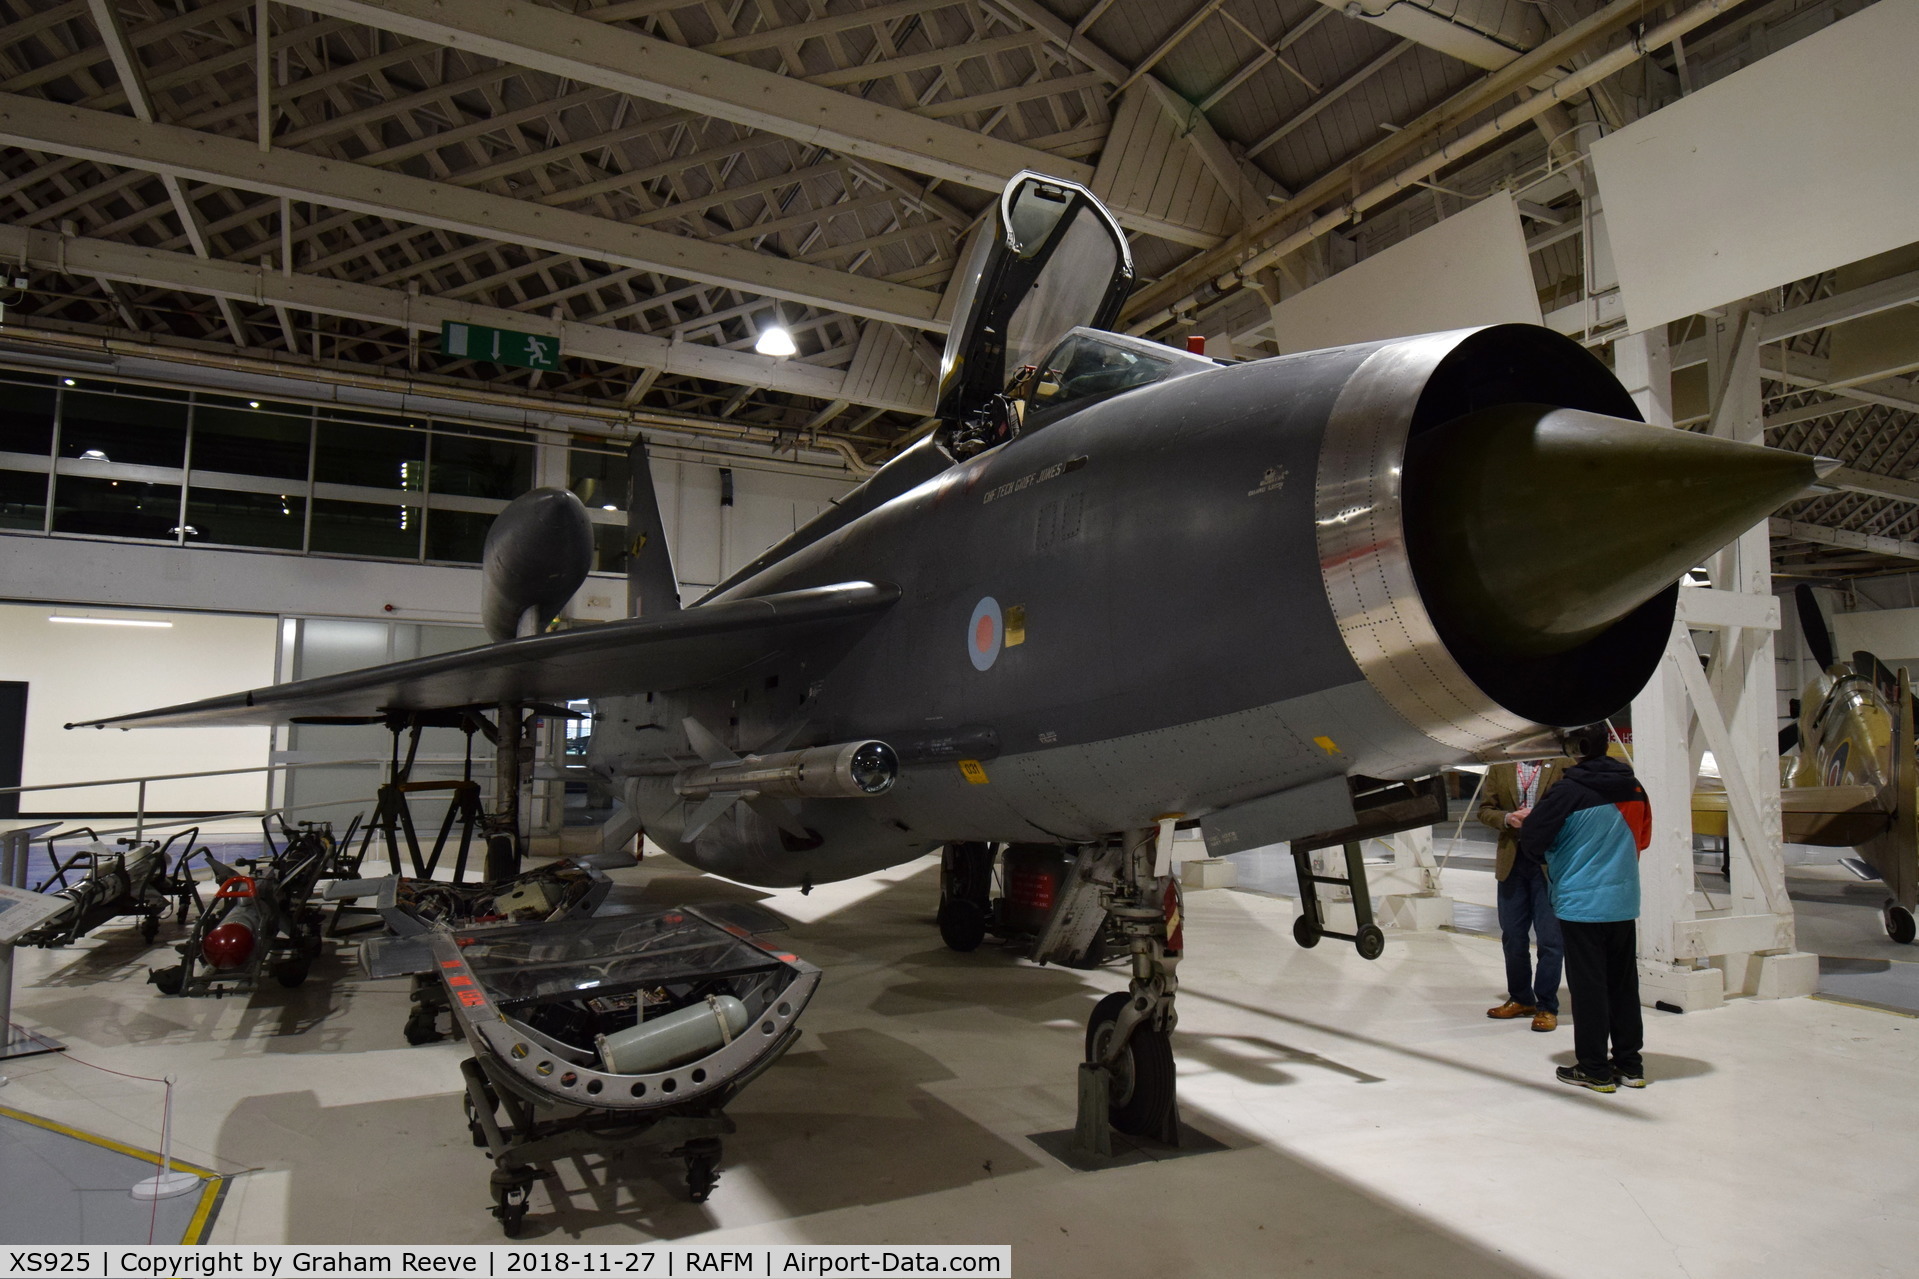 XS925, 1967 English Electric Lightning F.6 C/N 95258, On display at the RAF Museum, Hendon.